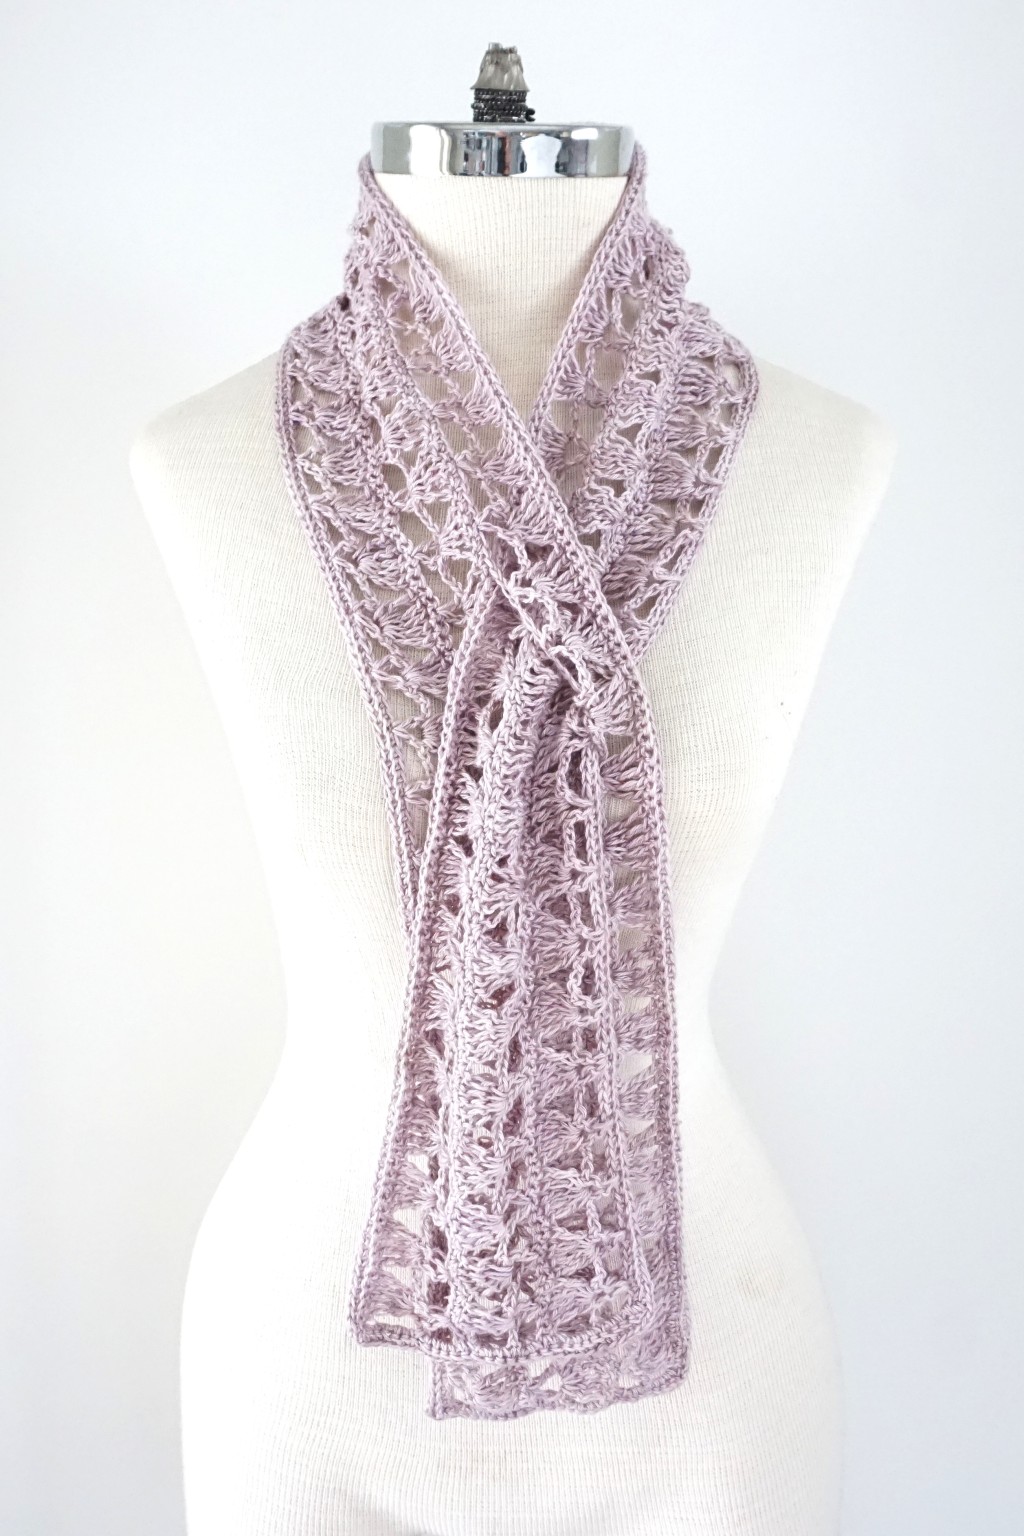 New Amelia Lace Scarf perfect for Spring!